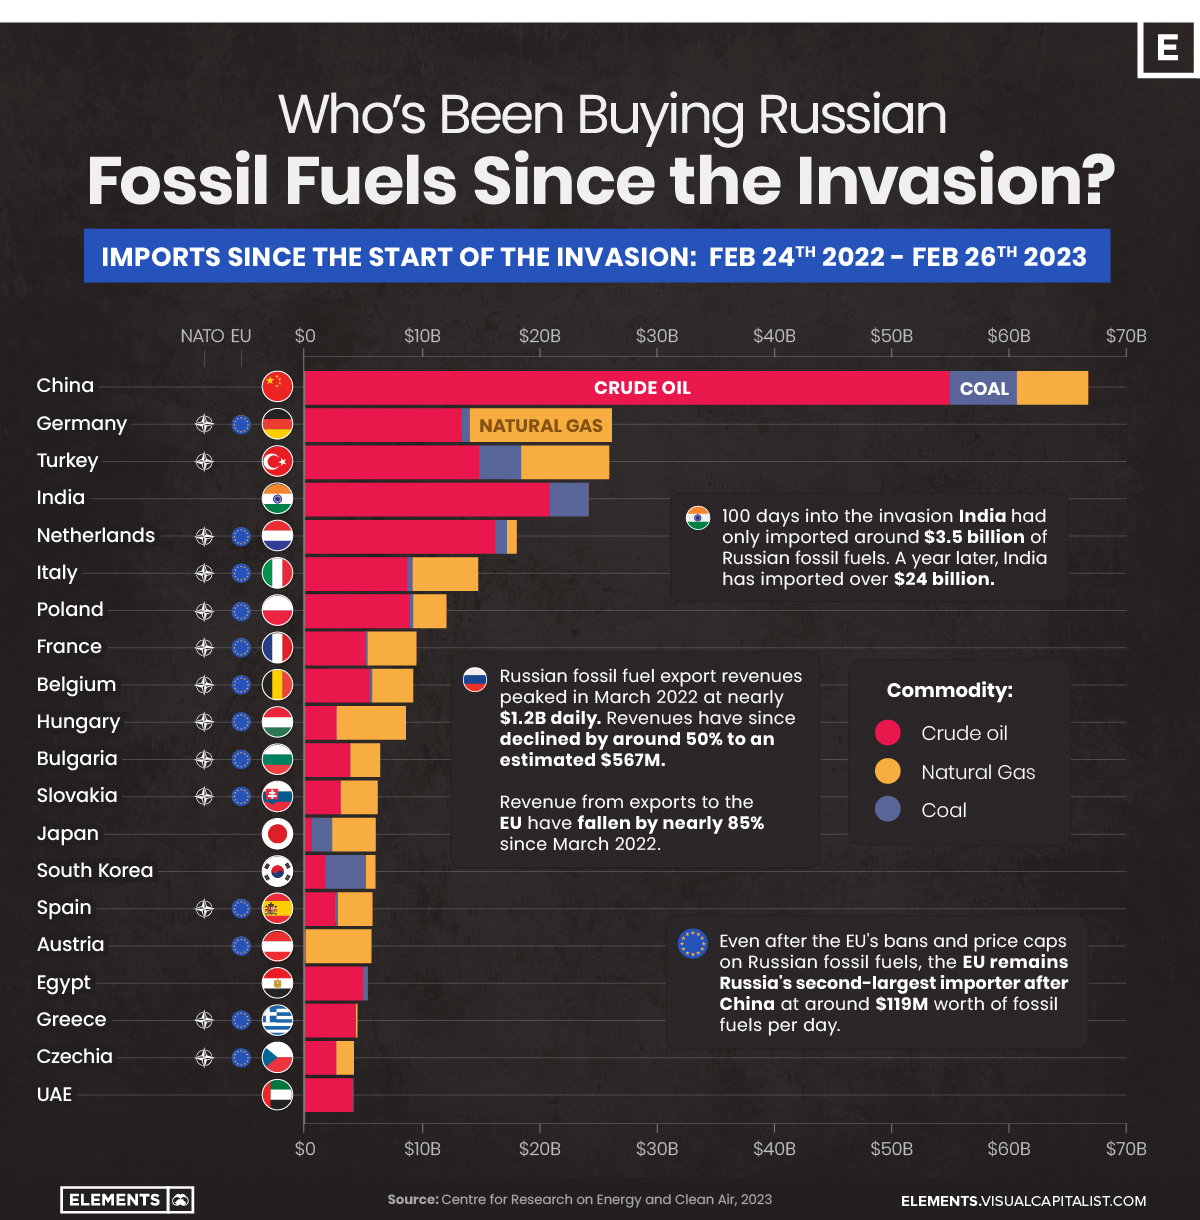 Bar chart of top importing nations of Russian fossil fuels